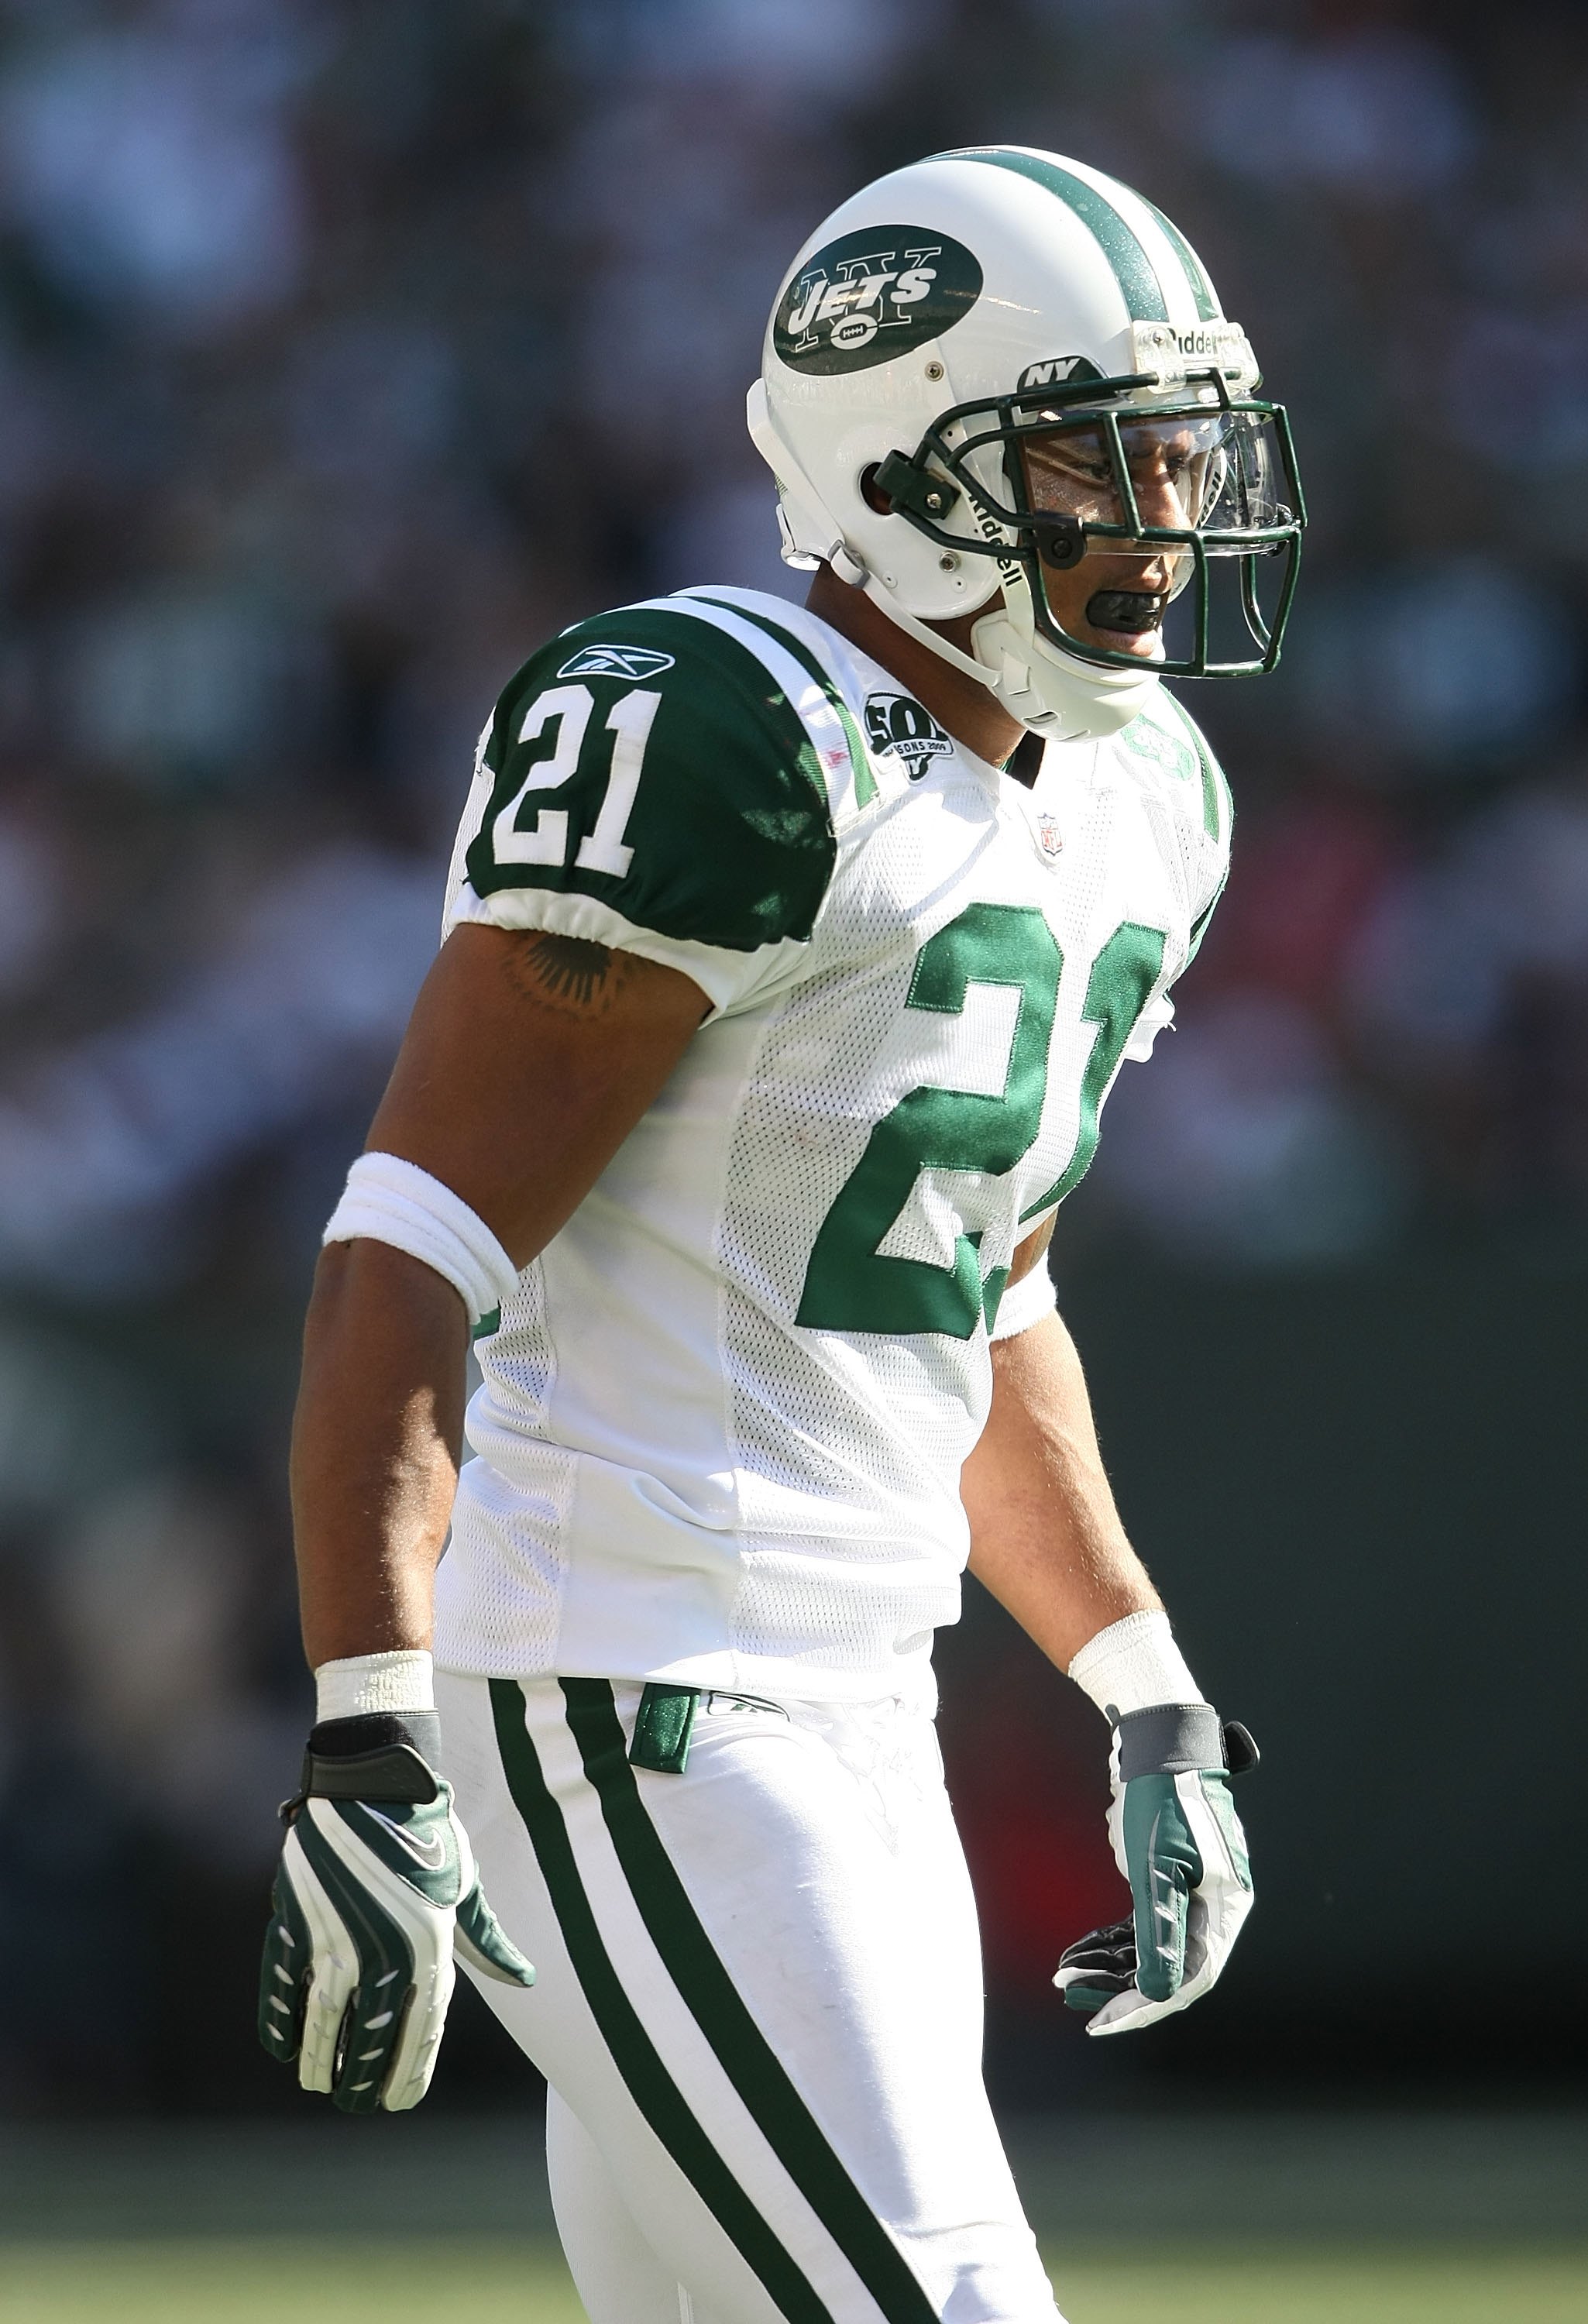 EAST RUTHERFORD, NJ - SEPTEMBER 20: Dwight Lowery #21 of the New York Jets against the New England Patriots at Giants Stadium on September 20, 2009 in East Rutherford, New Jersey.  (Photo by Nick Laham/Getty Images)